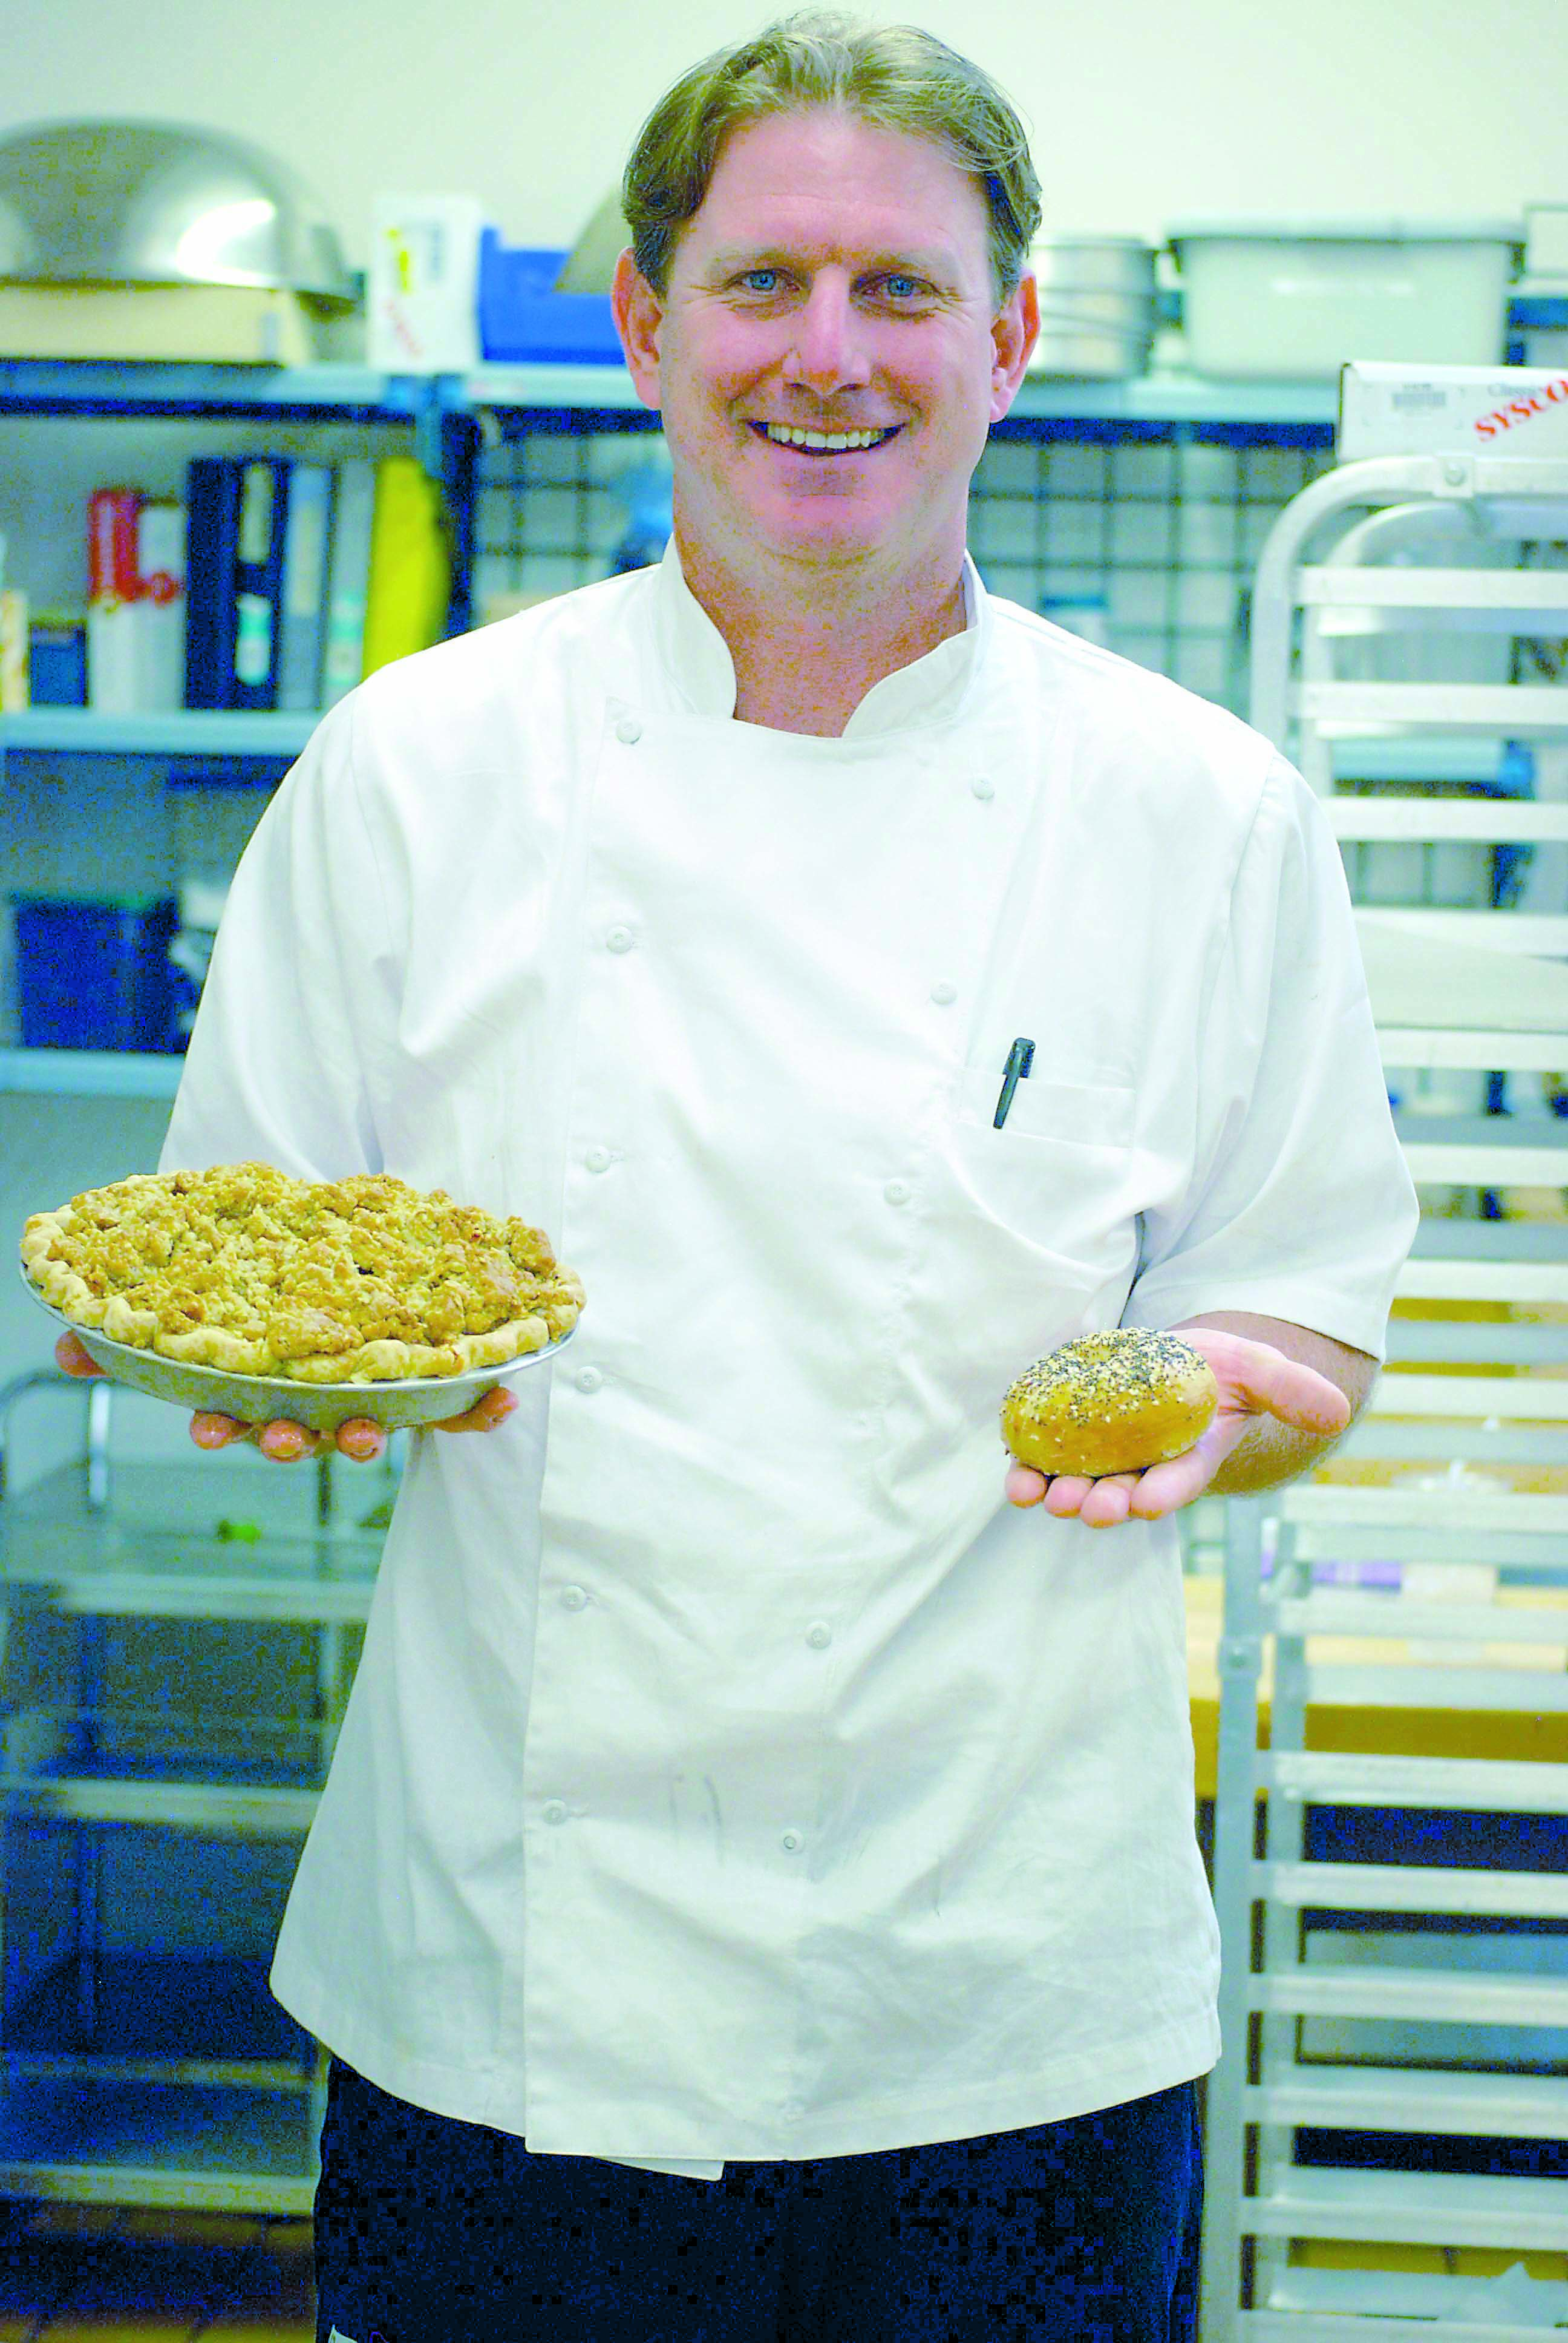 Arran Stark proudly displays local baked goods: an apple pie by pastry chef Cyndee Nighswonger and a bagel from Bob's Bagels of Port Townsend. Diane Urbani de la Paz/Peninsula Daily News